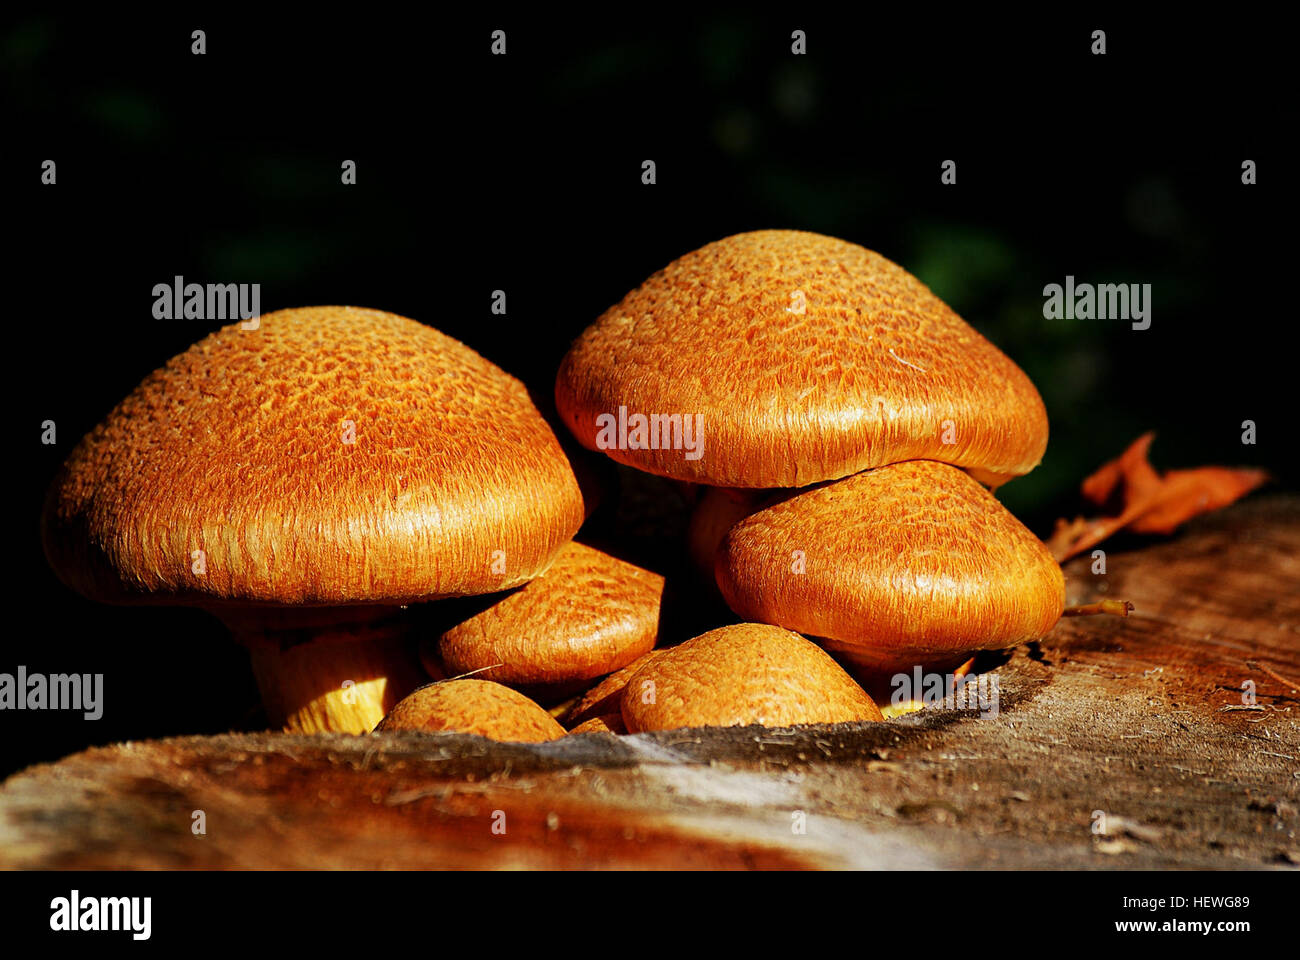 Gymnopilus junonius is a species of mushroom in the family Cortinariaceae. Commonly known as laughing gym, laughing Jim, or the spectacular rustgill, this large orange mushroom is typically found growing on tree stumps, logs, or tree bases. Some subspecies of this mushroom contain the hallucinogenic compound psilocybin. Stock Photo